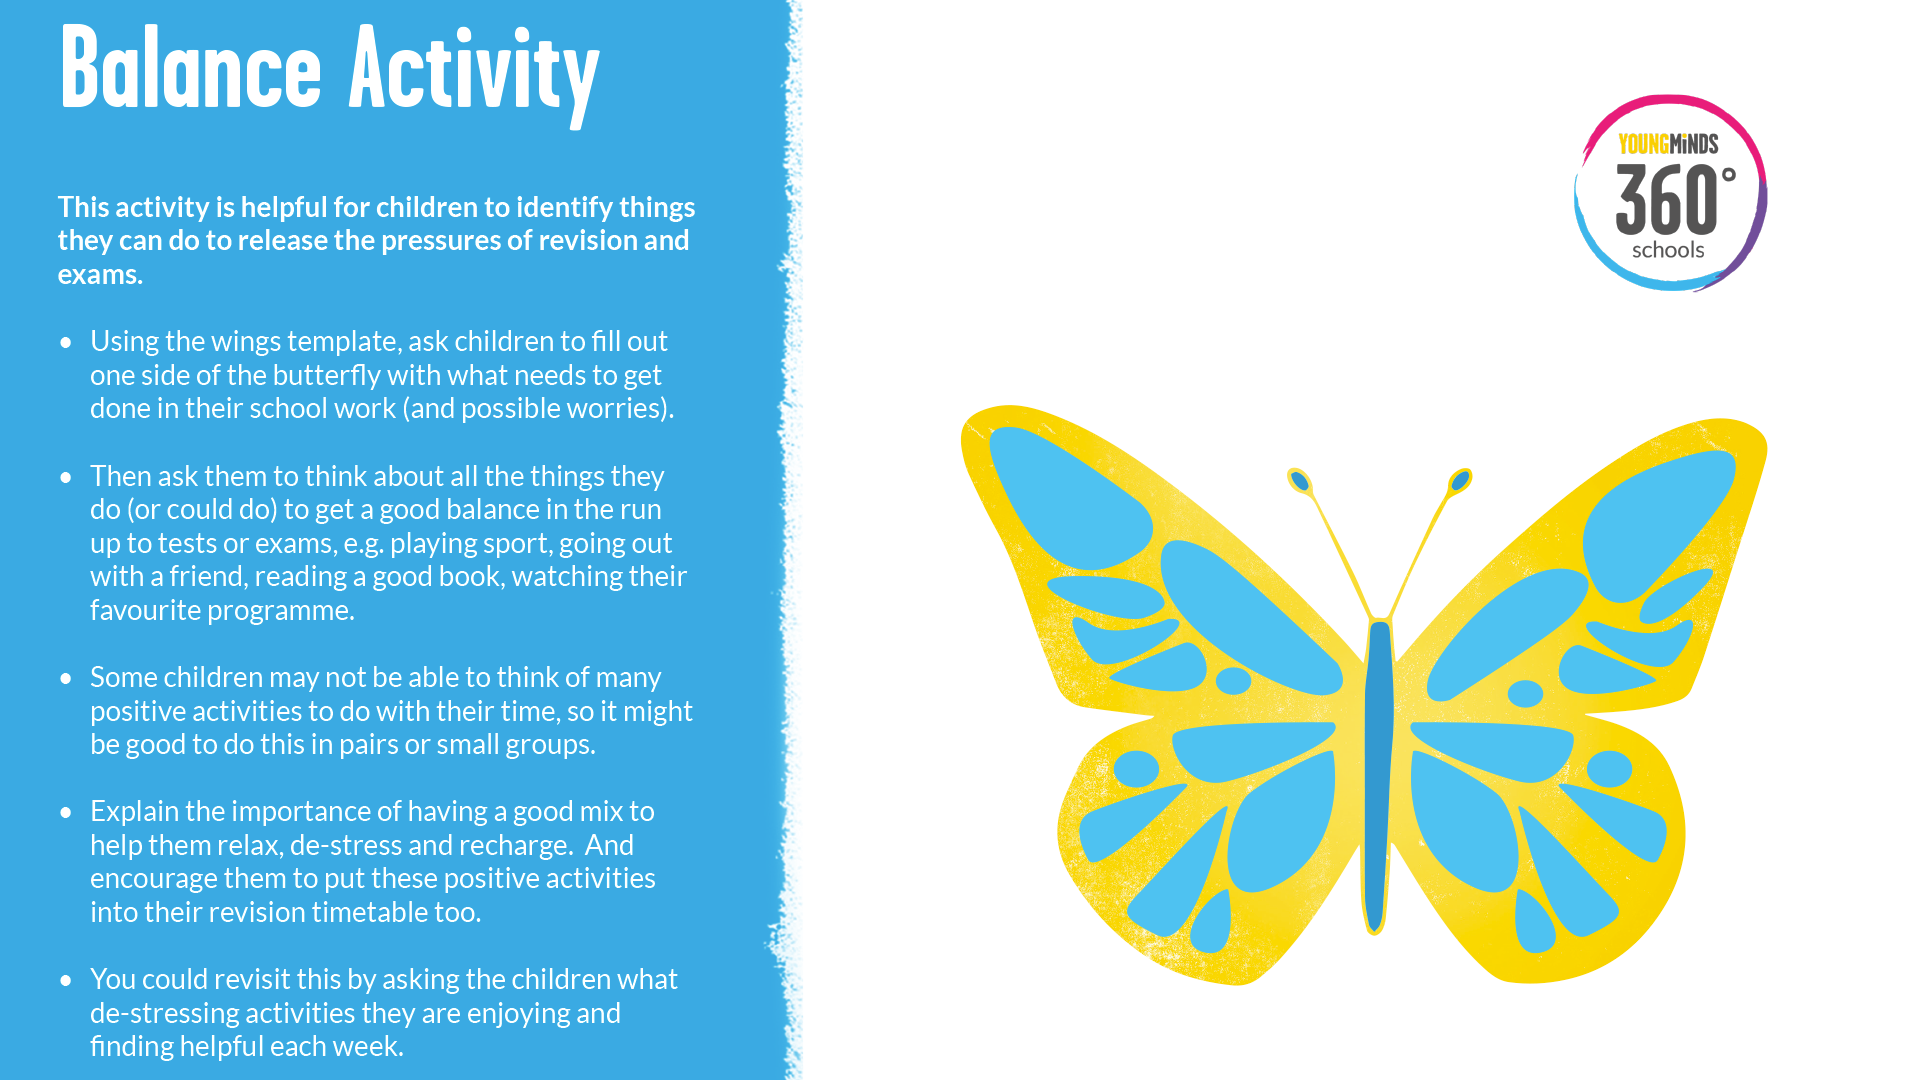 An image of our Balance Activity with a yellow and blue cartoon styled butterfly.